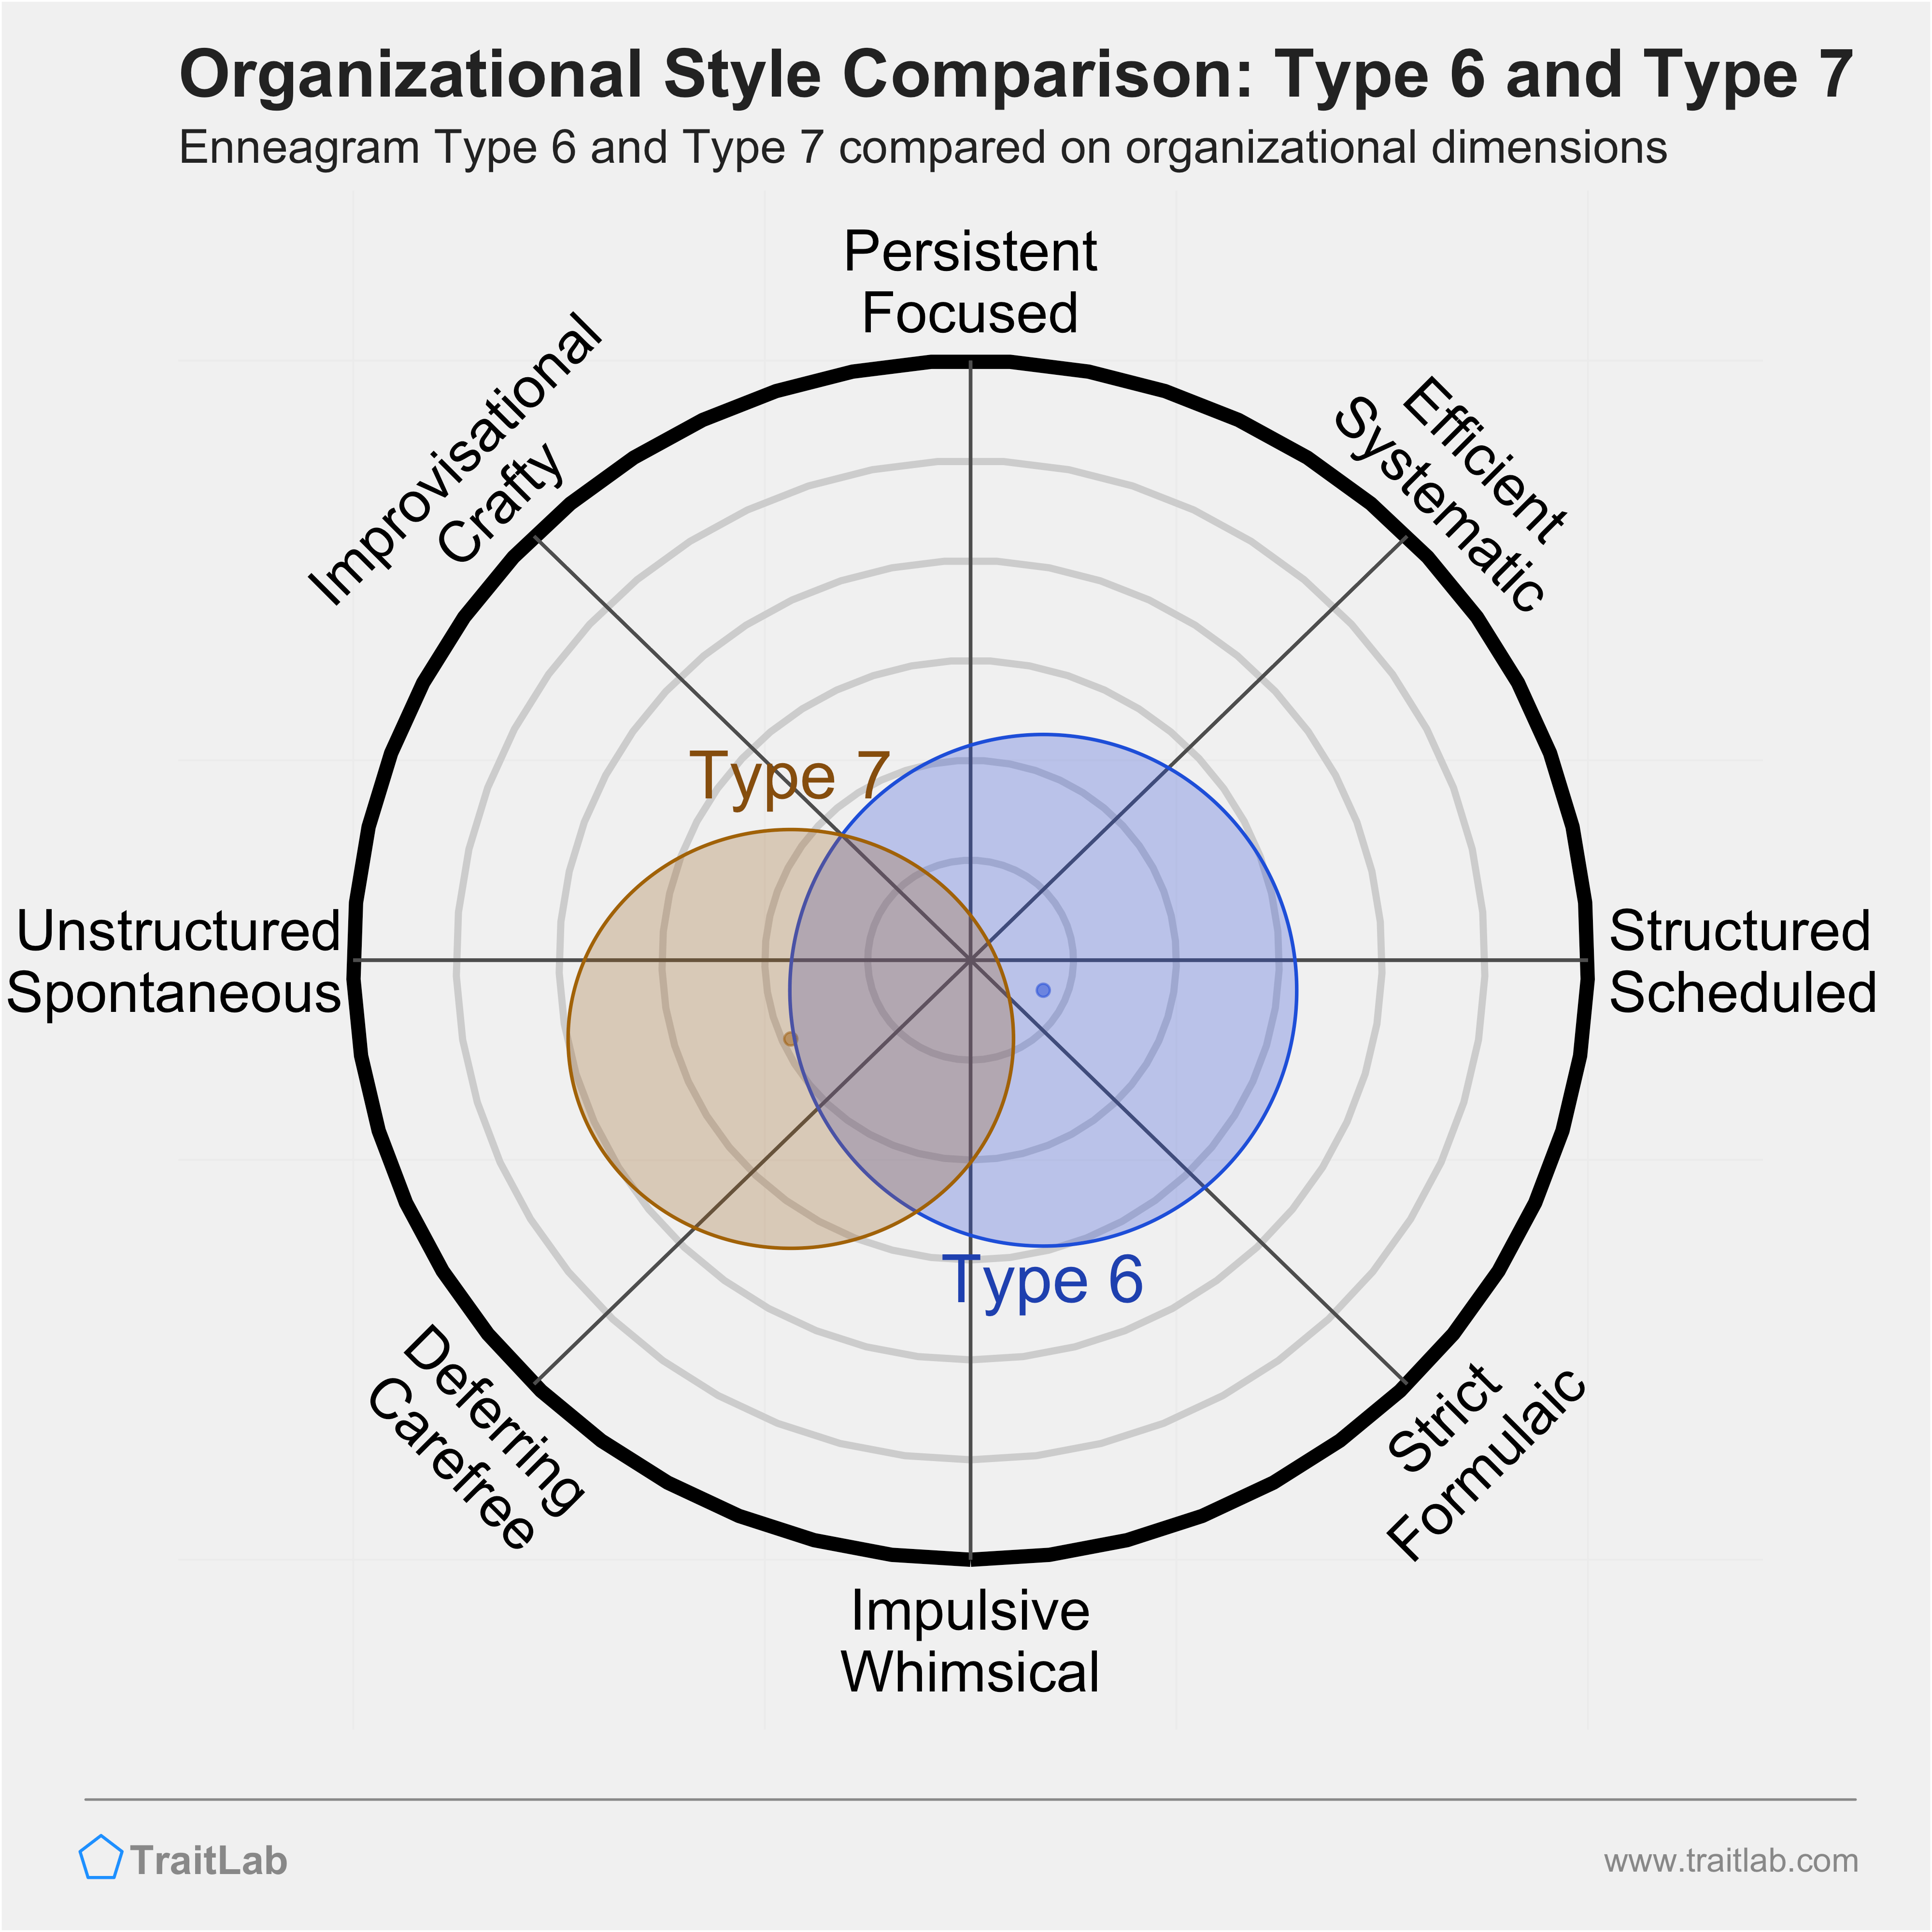 Type 6 and Type 7 comparison across organizational dimensions